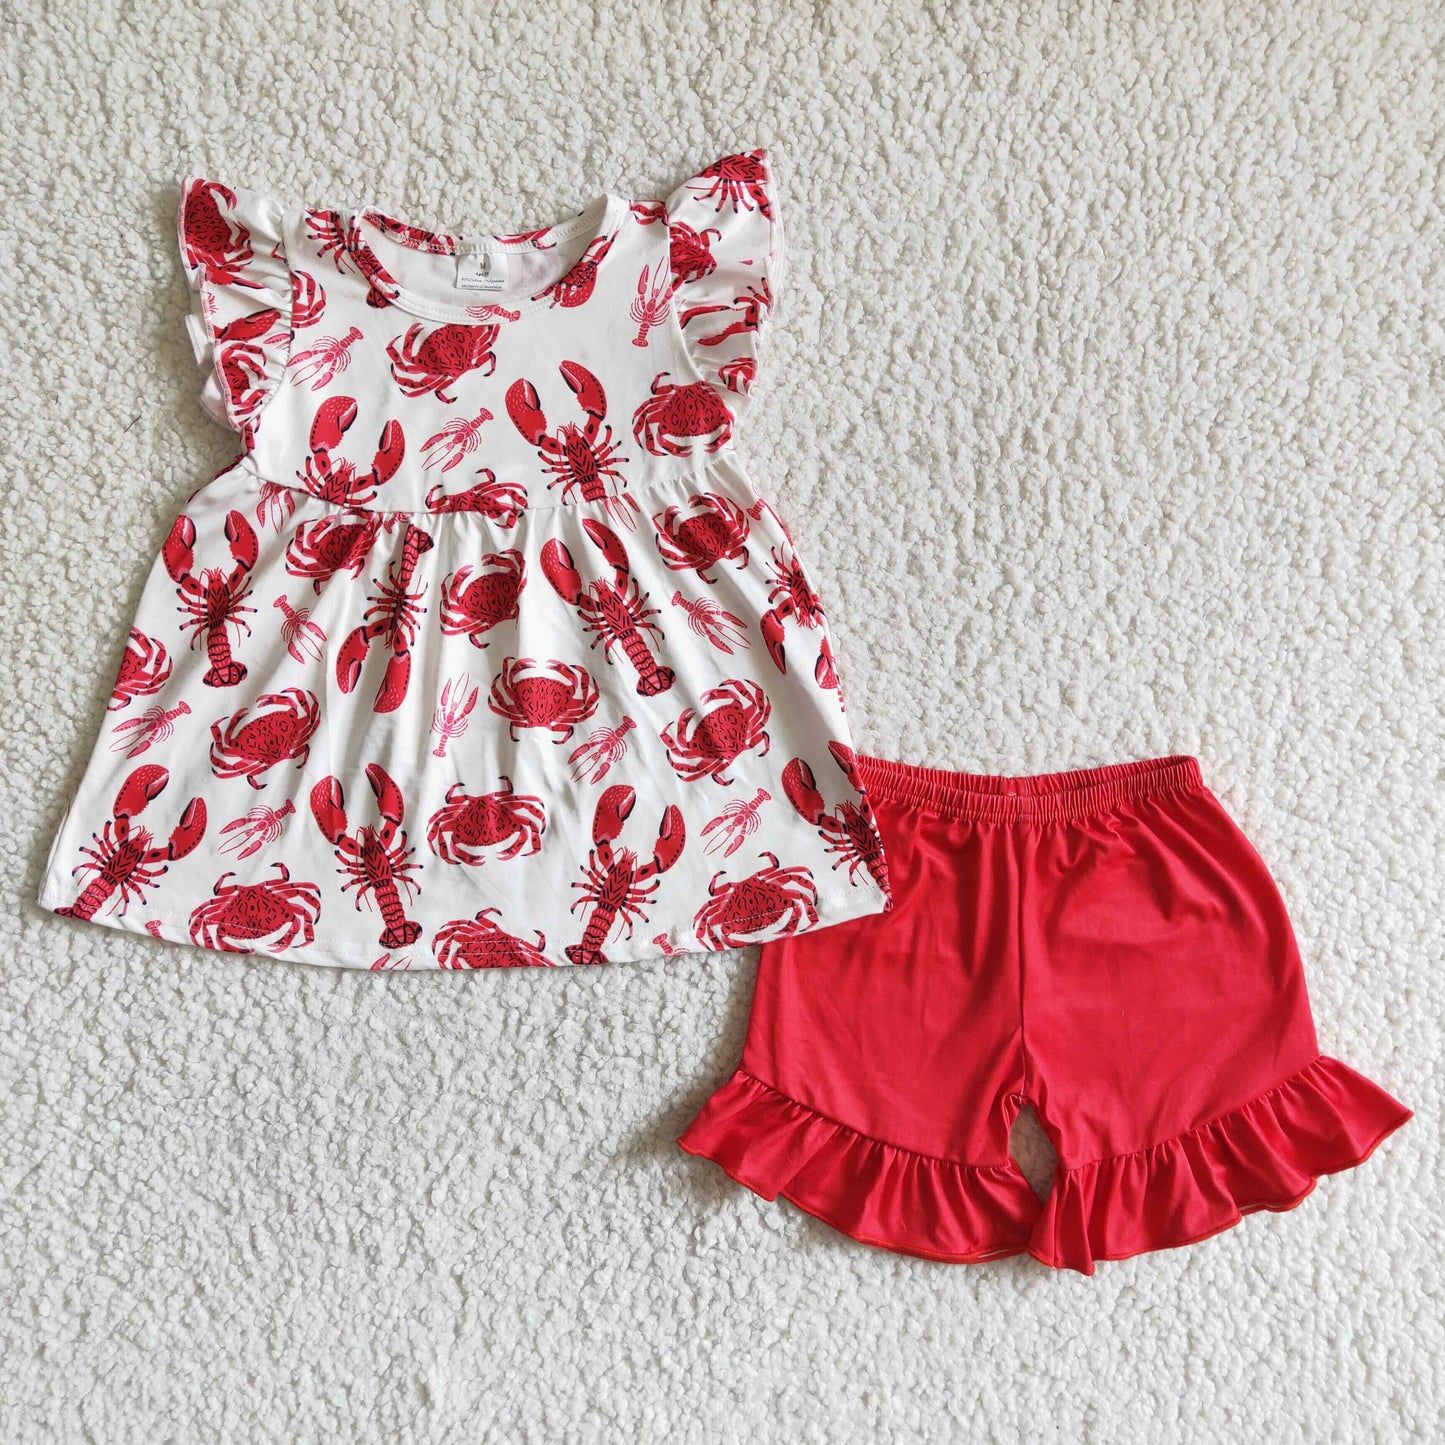 girl's clothing crawfish outfit shorts set for summer